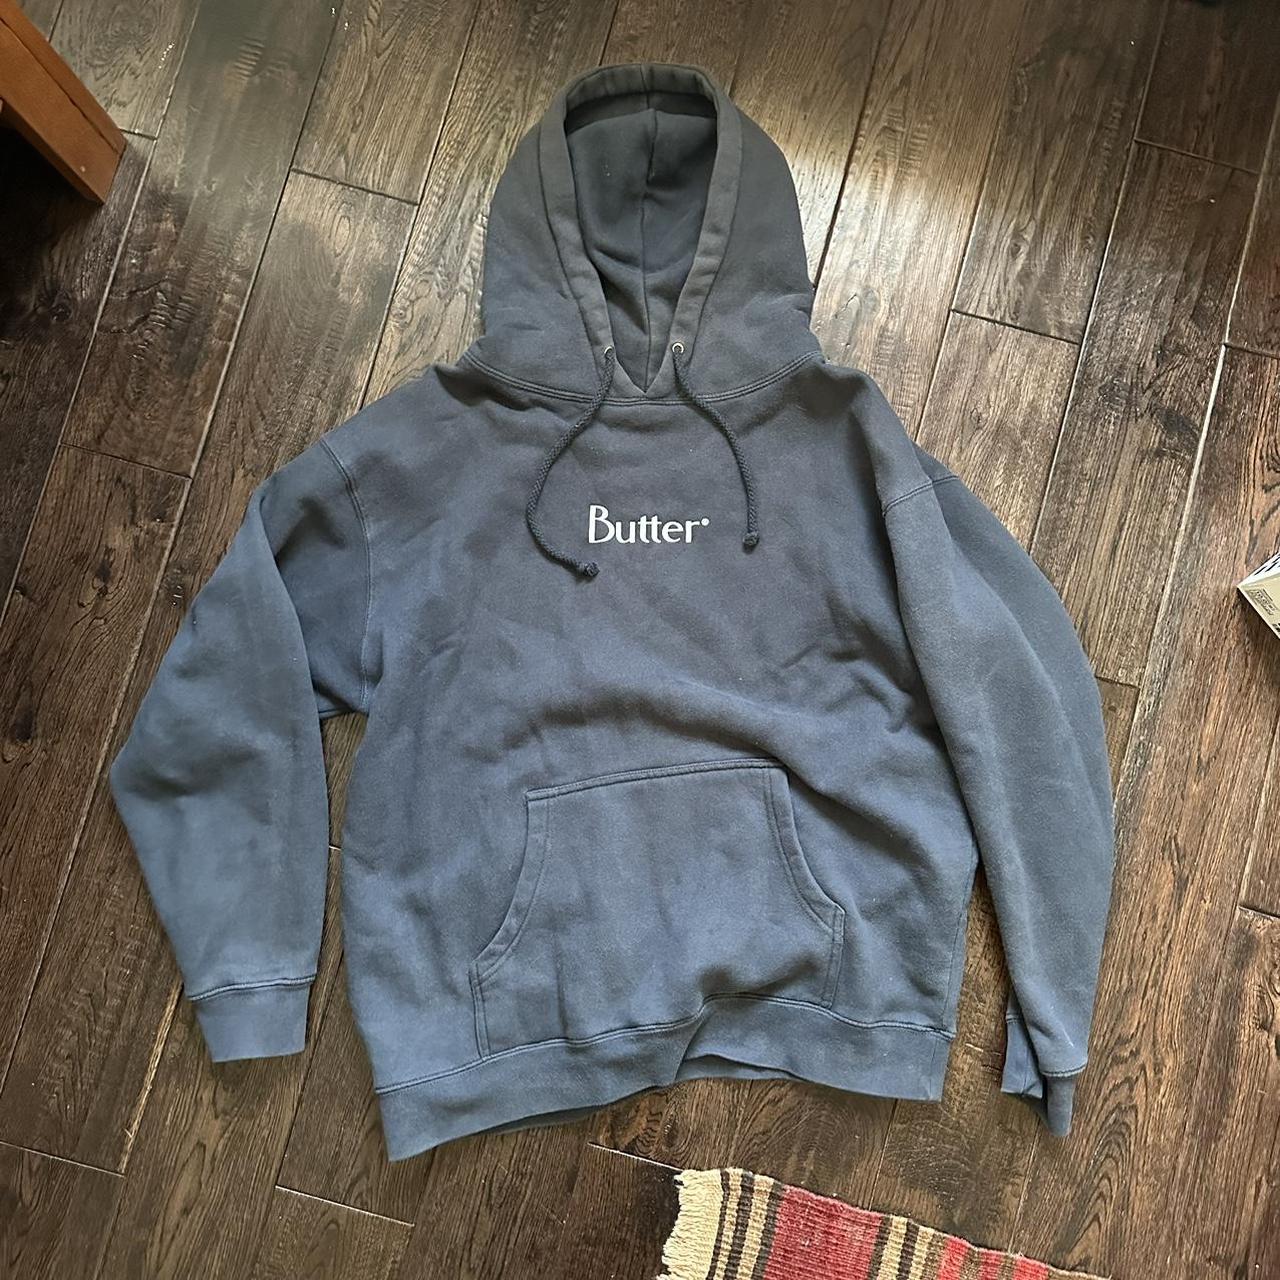 item listed by duhcota